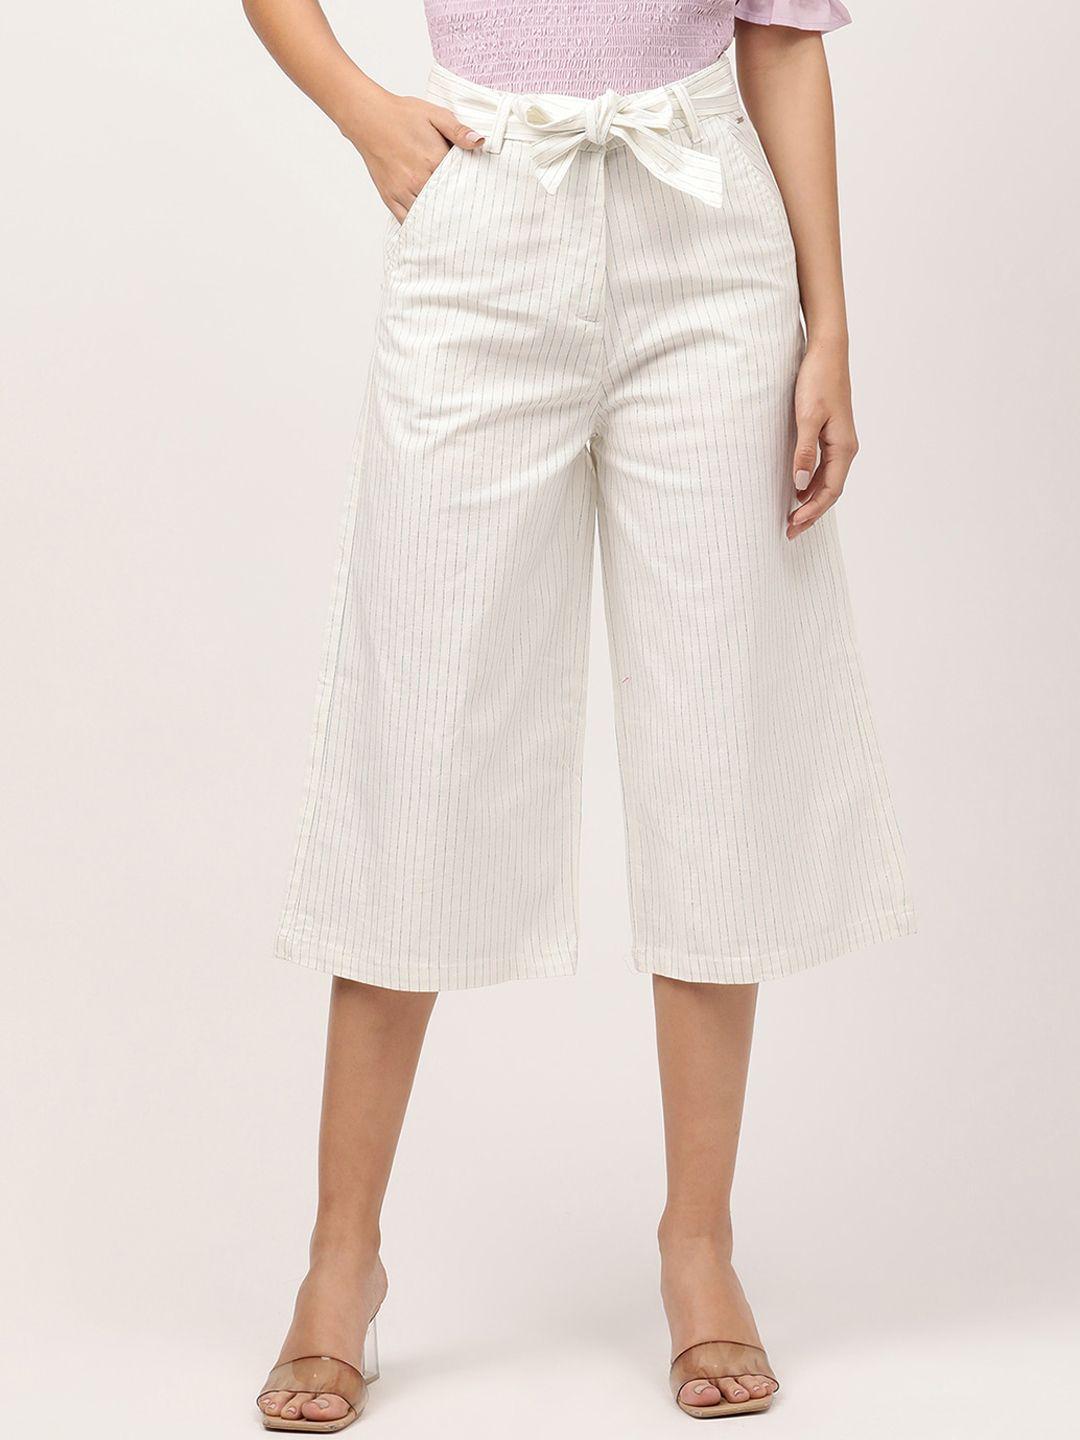 elle-women-white-striped-relaxed-cotton-culottes-trousers